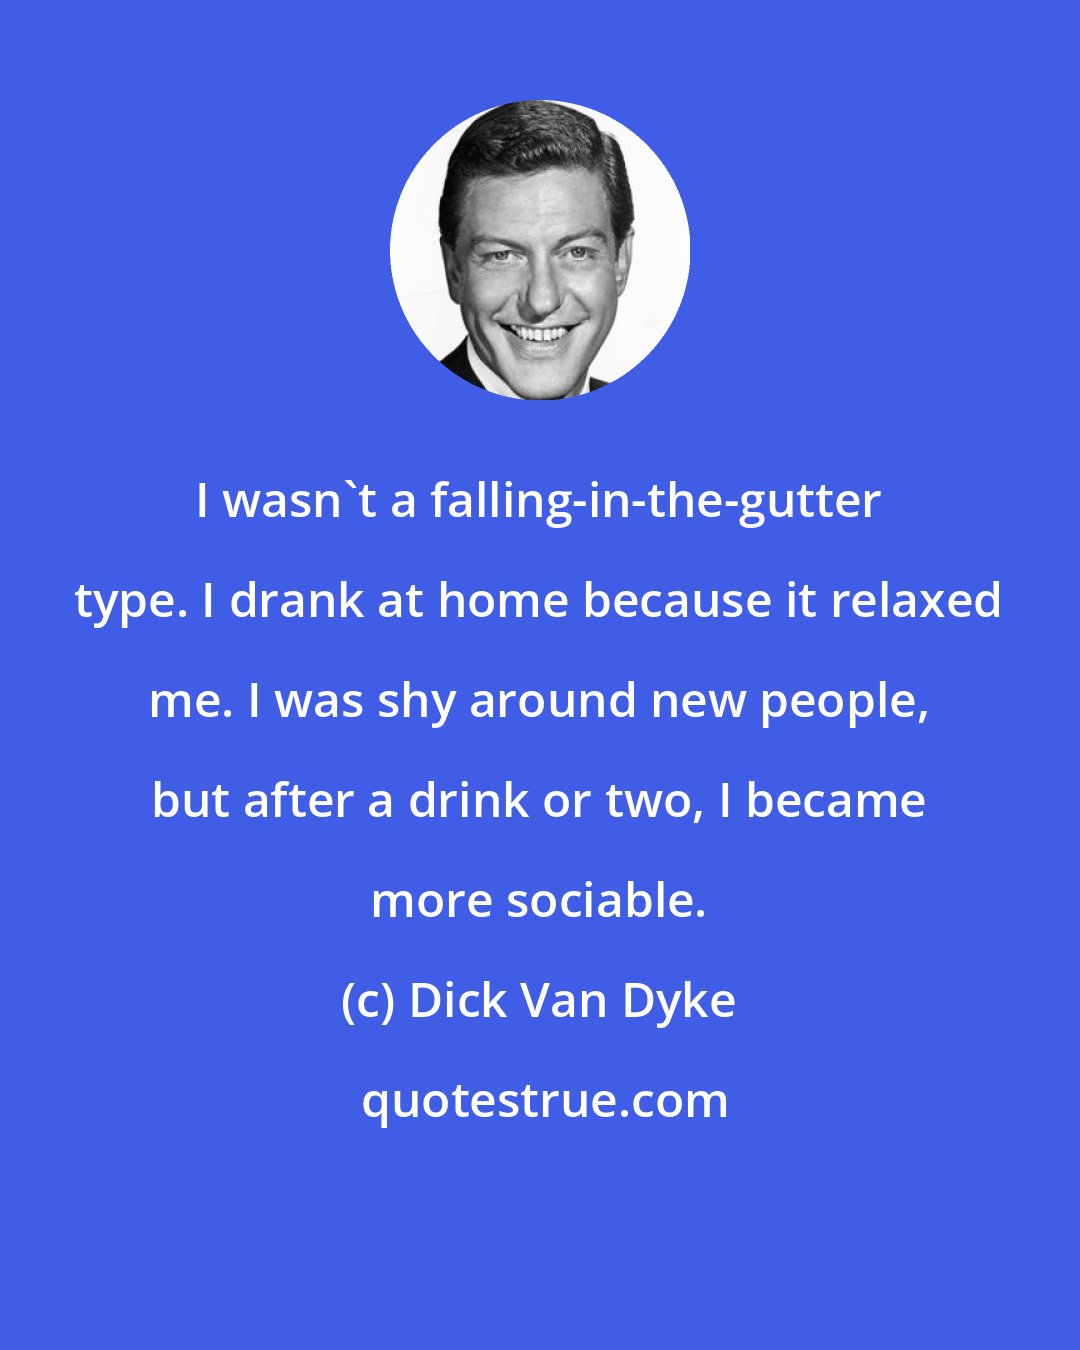 Dick Van Dyke: I wasn't a falling-in-the-gutter type. I drank at home because it relaxed me. I was shy around new people, but after a drink or two, I became more sociable.